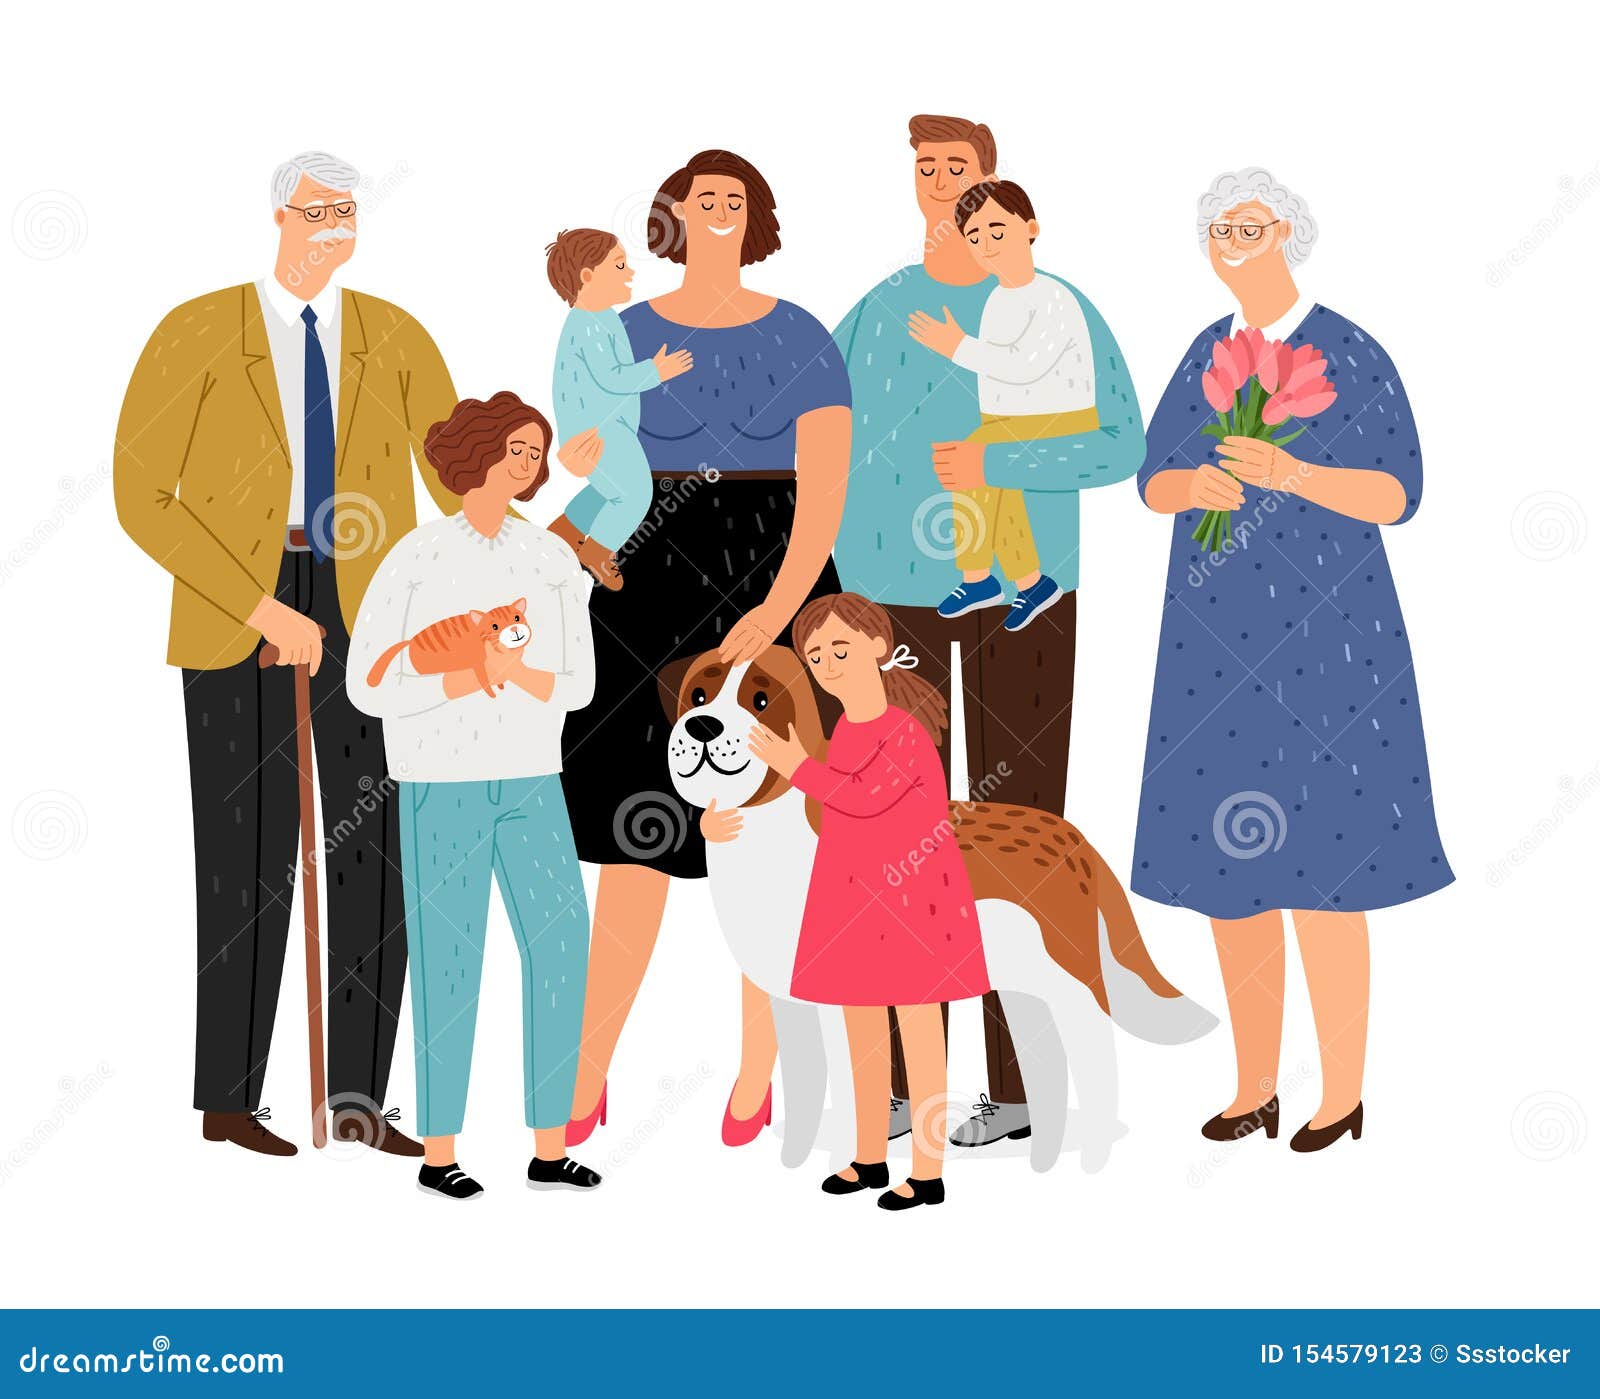 Big family with pet stock vector. Illustration of grandmother - 154579123